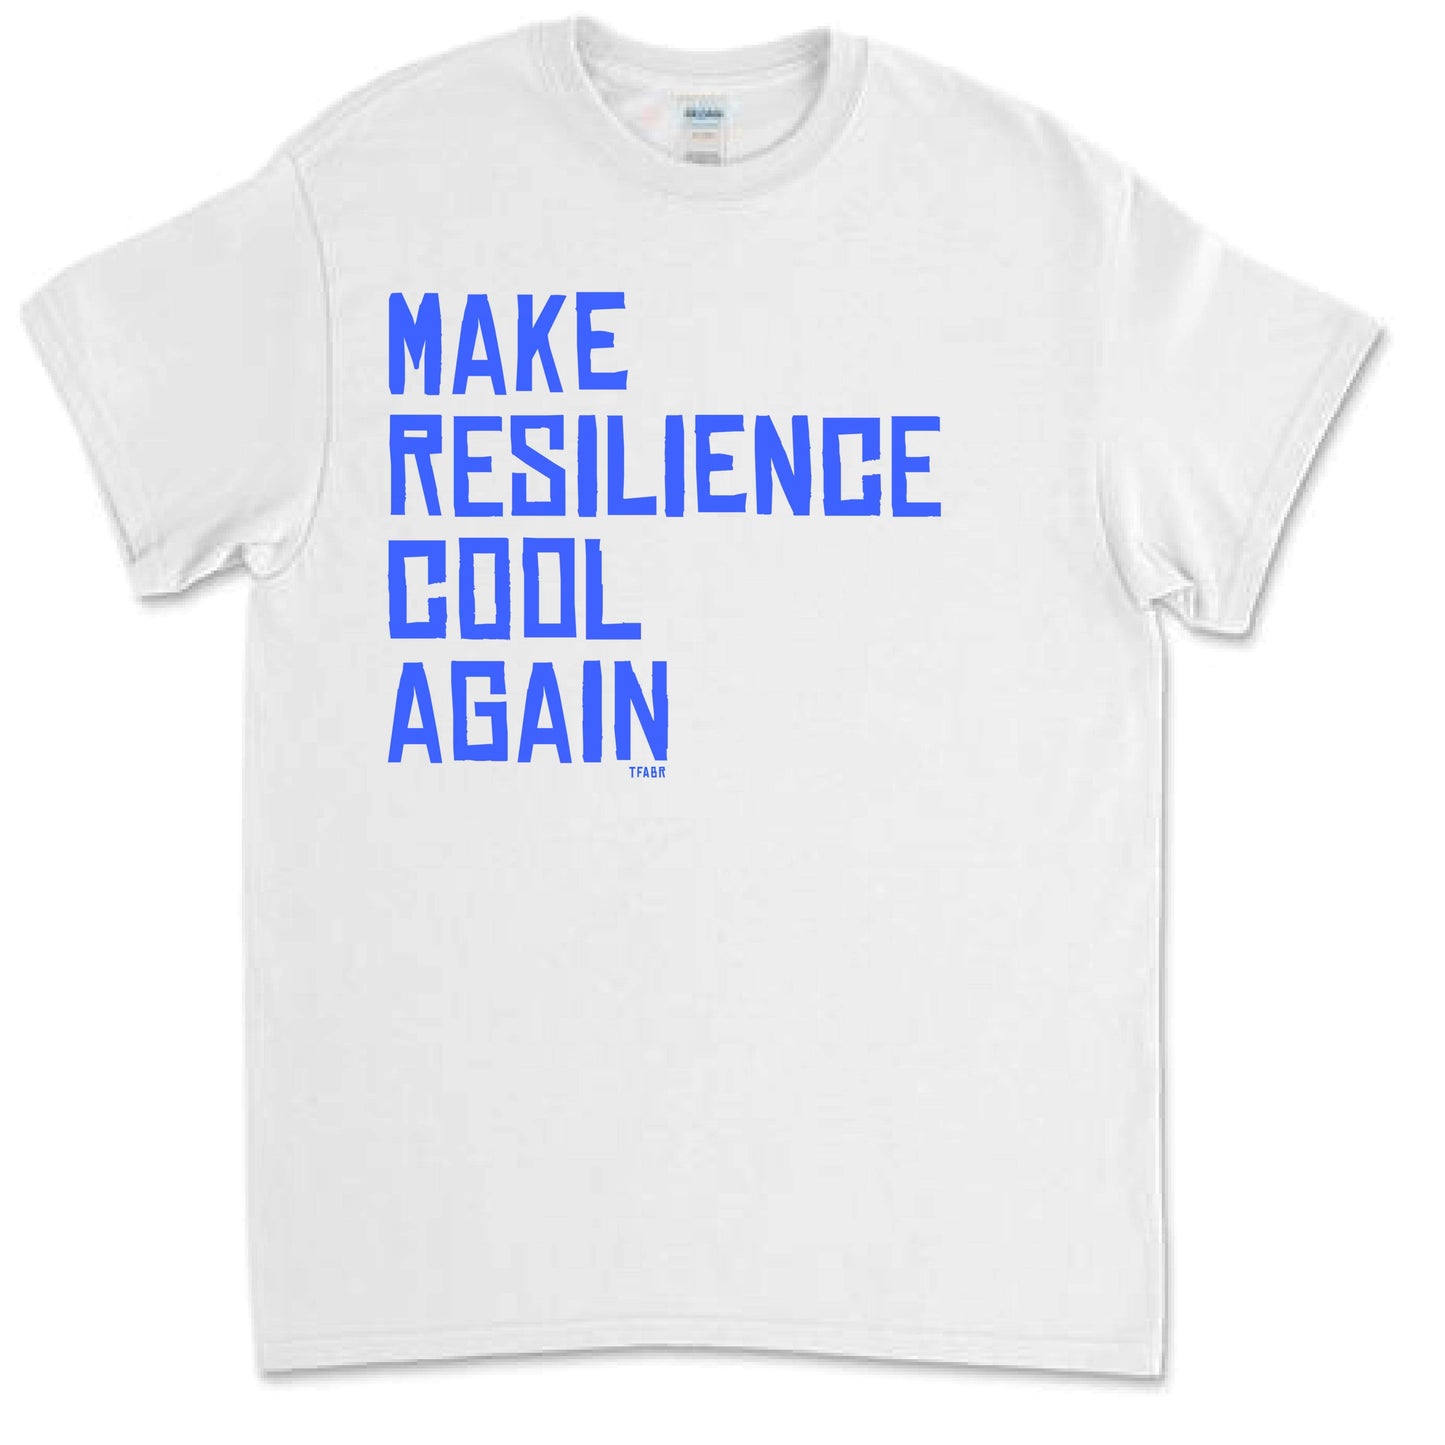 Resilience 2 T-Shirt